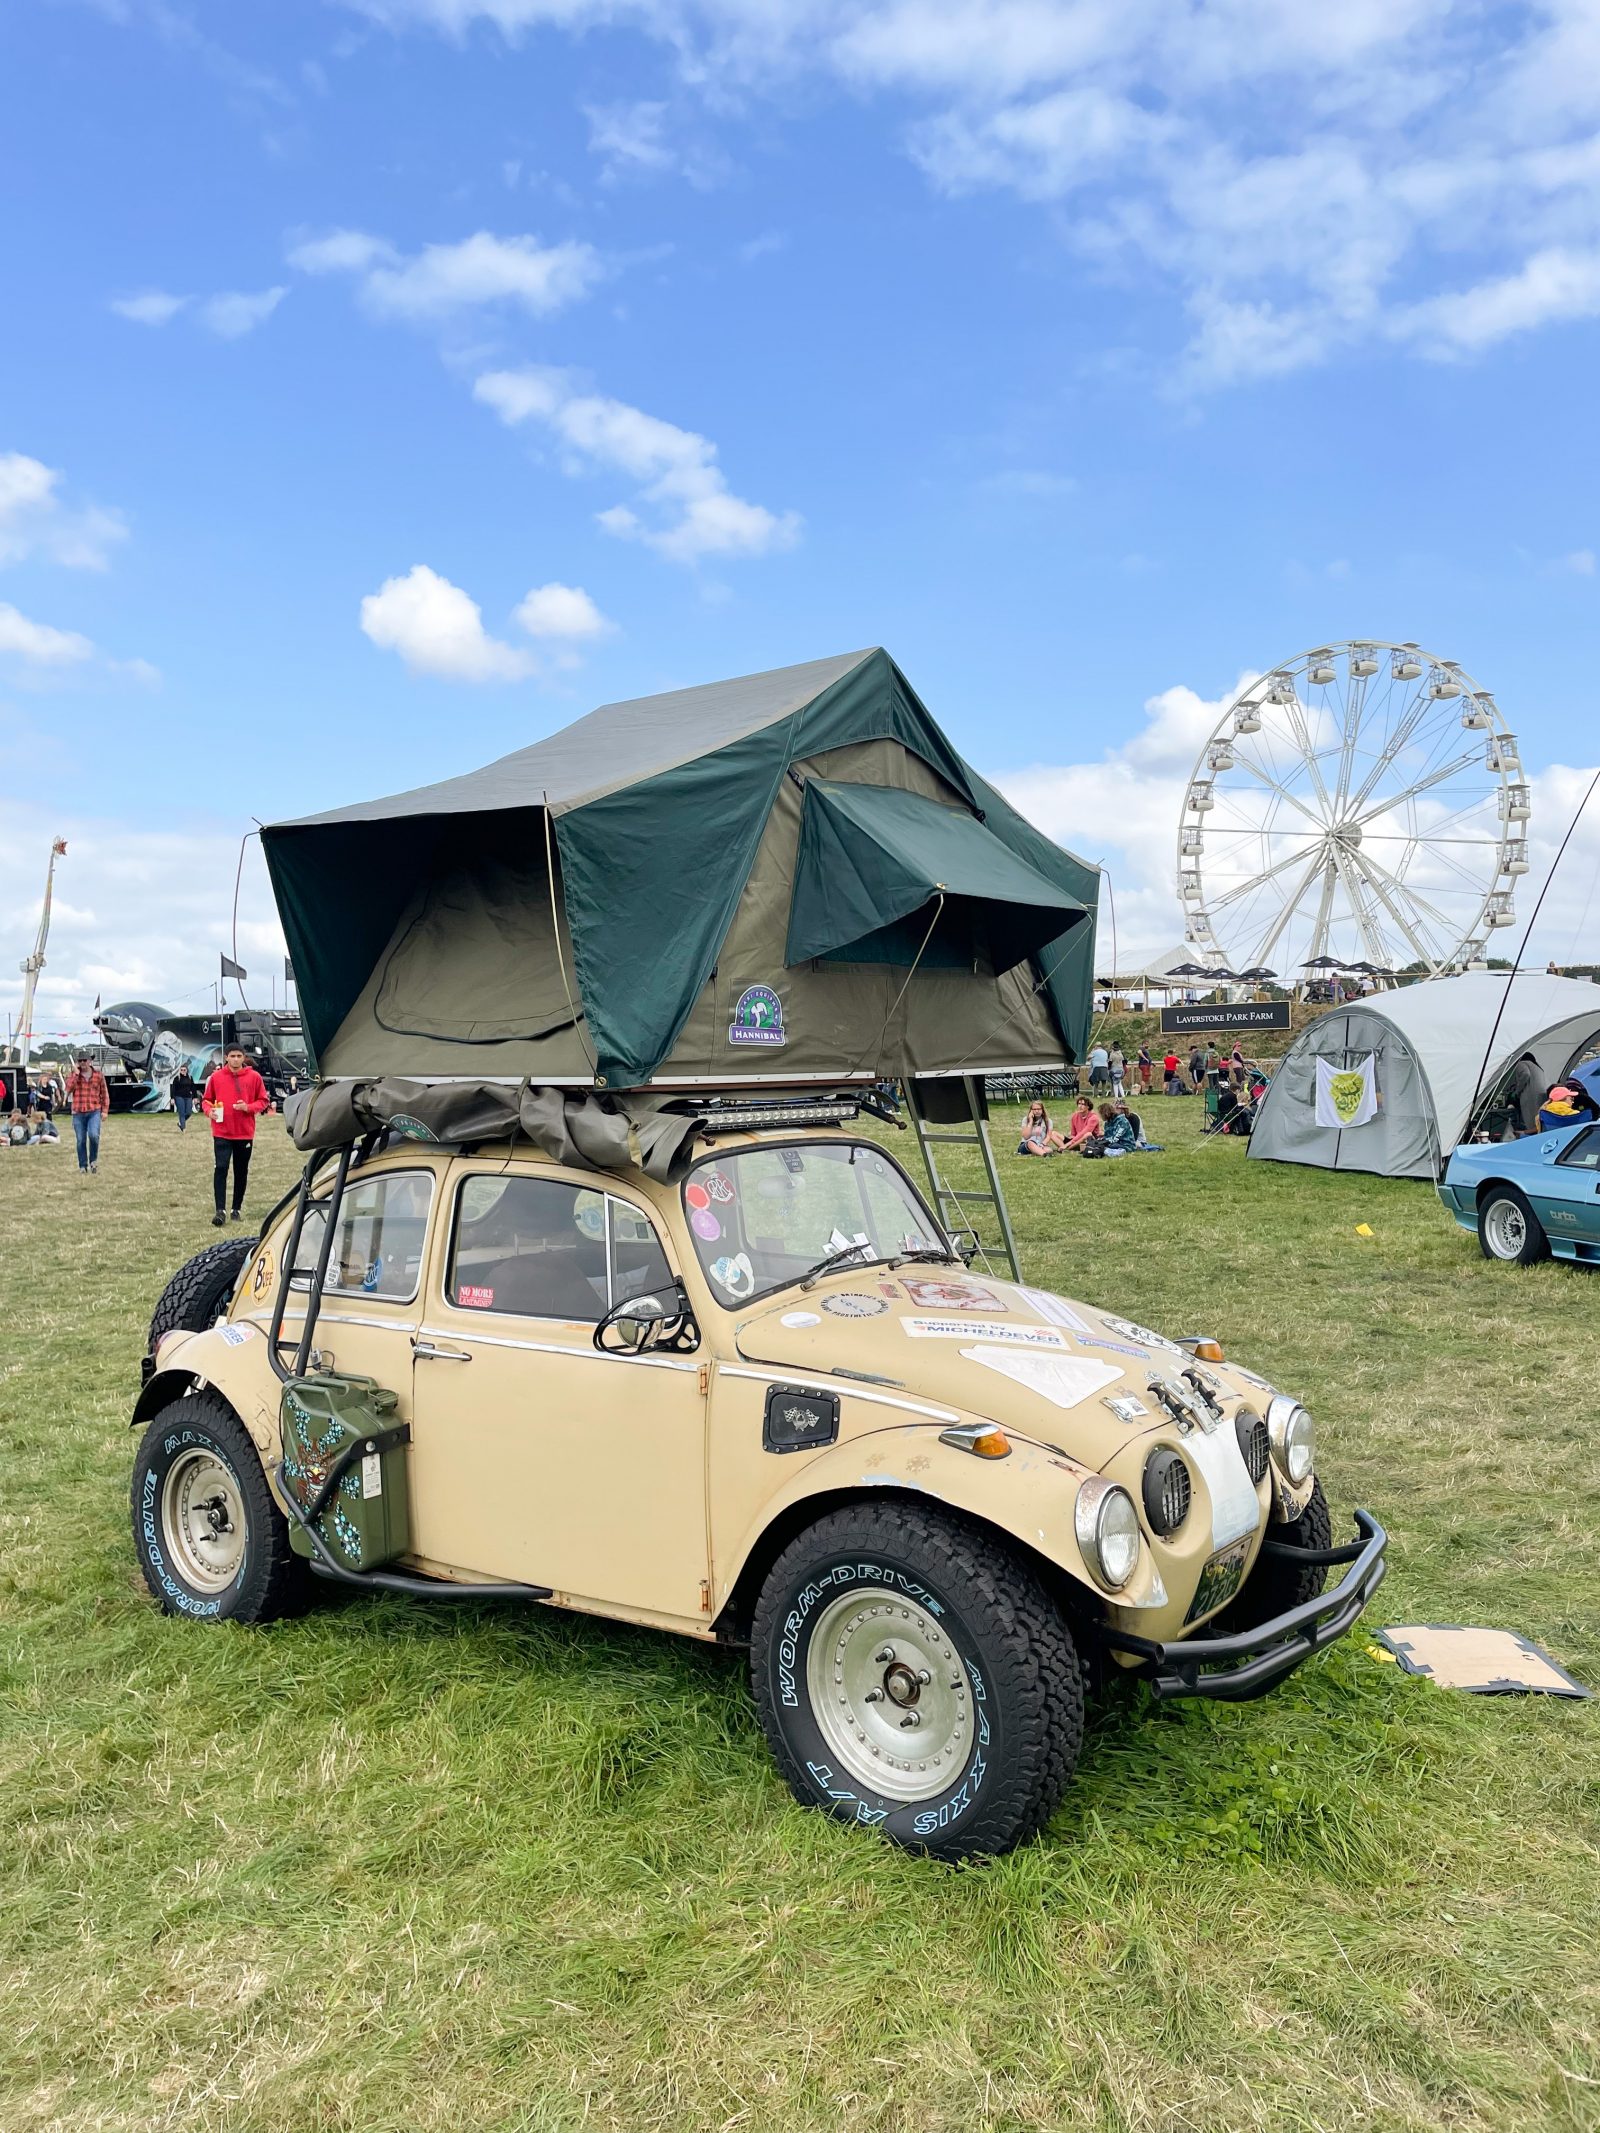 Volkswagen Beetle at CarFest South